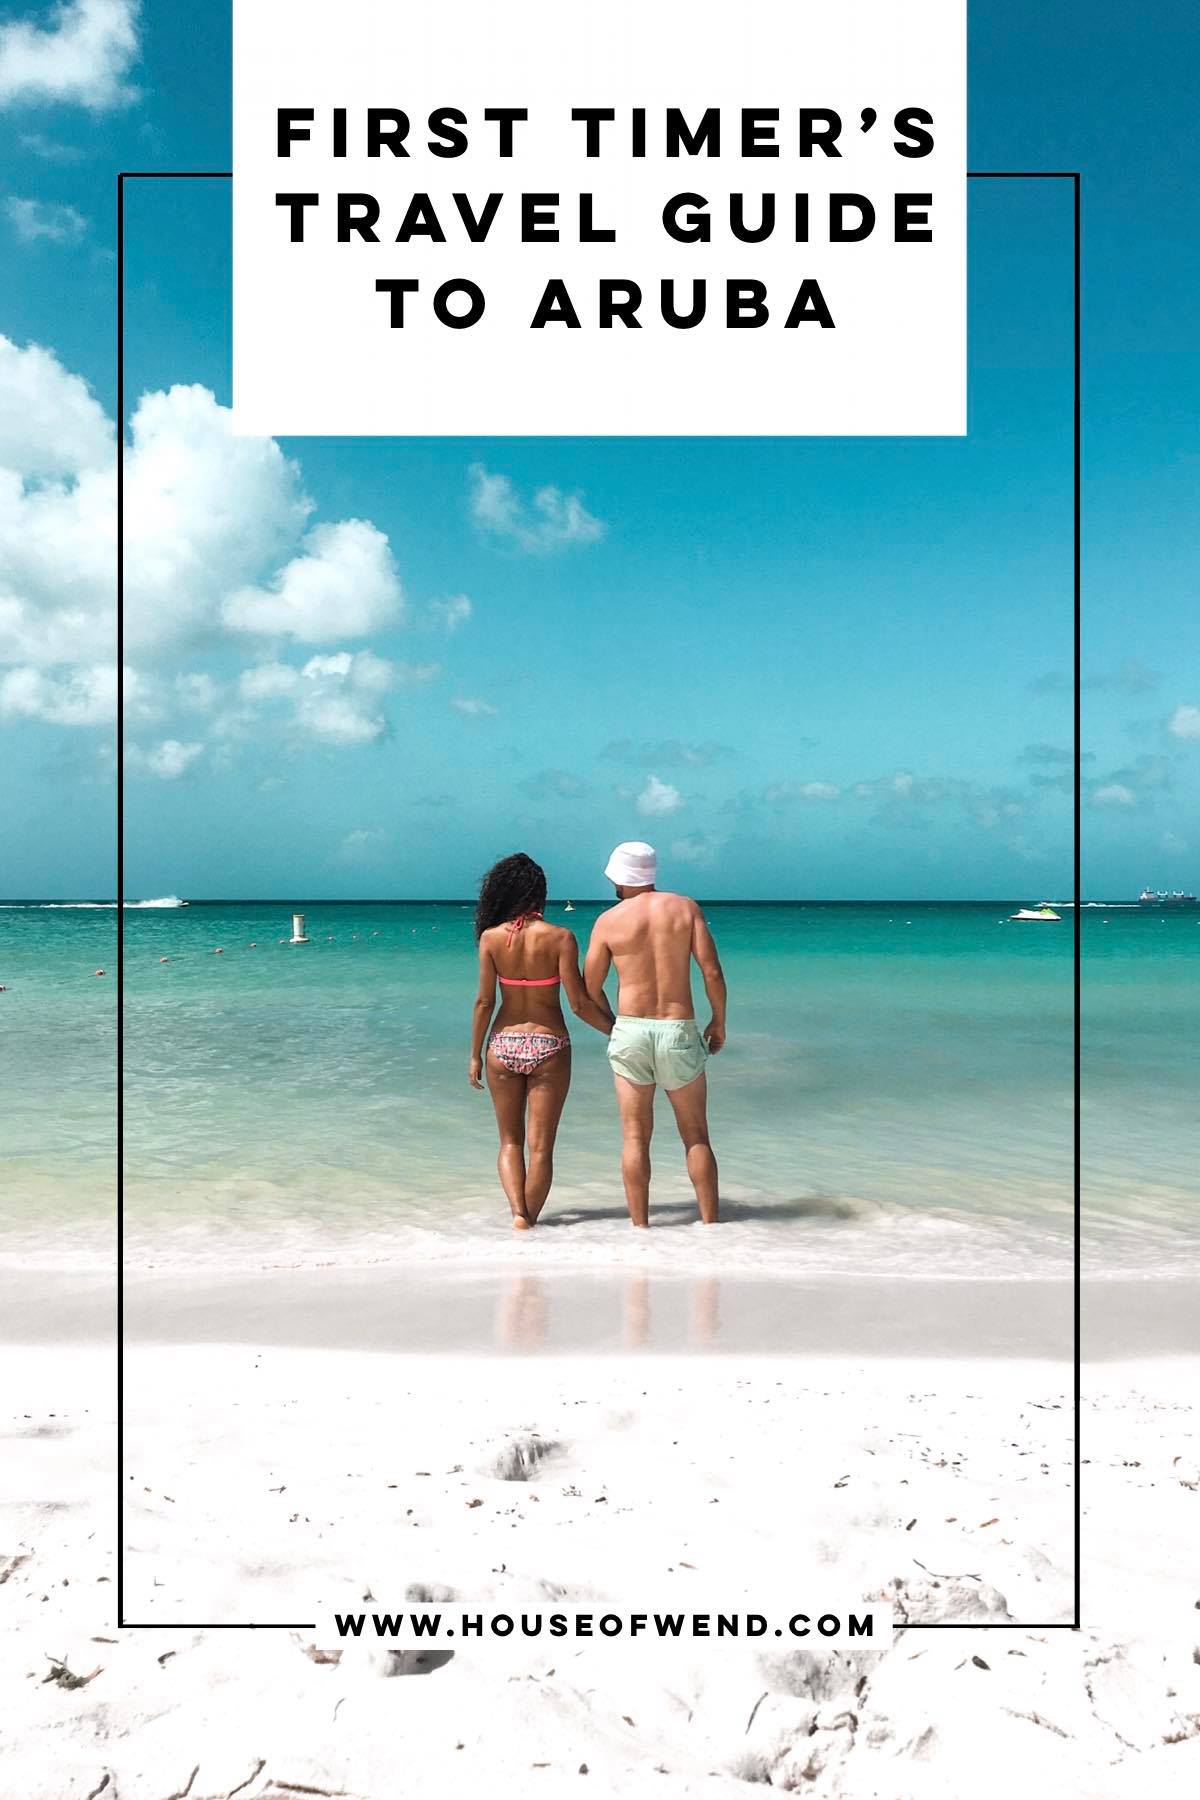 First Timer's Travel Guide to Aruba